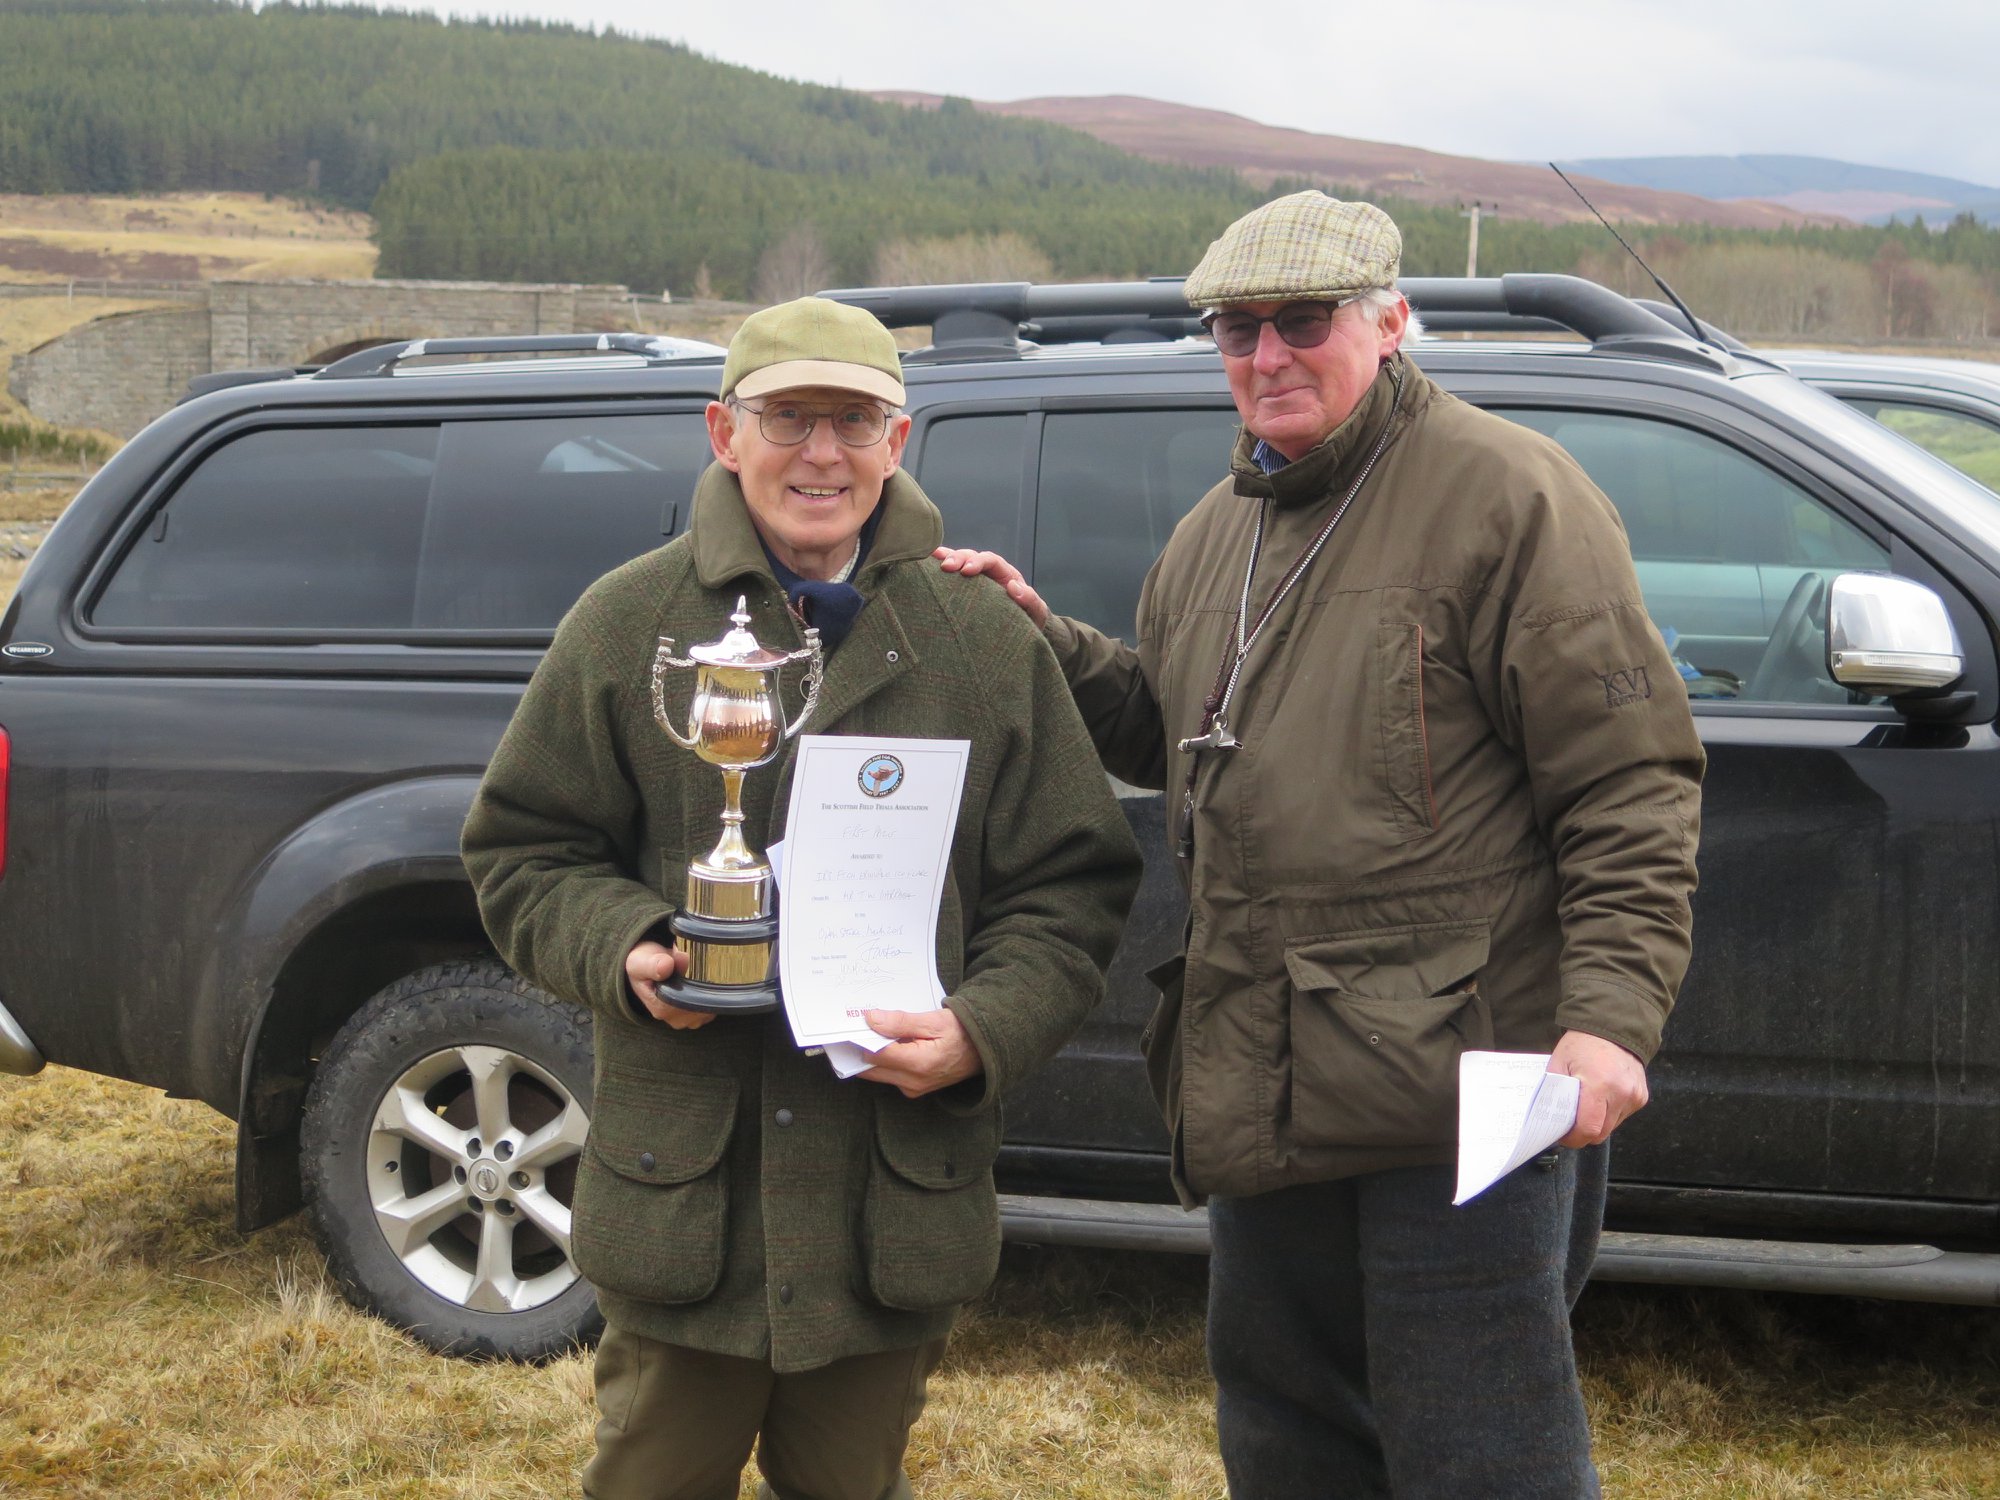 The Open Stake for Pointers and Setters on Friday March 30,2018 was won by Billy Darragh's Irish Setter bitch FT CH Erinvale Ice Flare. Honorary Secretary Jon Kean presented the Badanloch Cup to Billy. The Judges were Shaun McCormack and Bill Connolly.